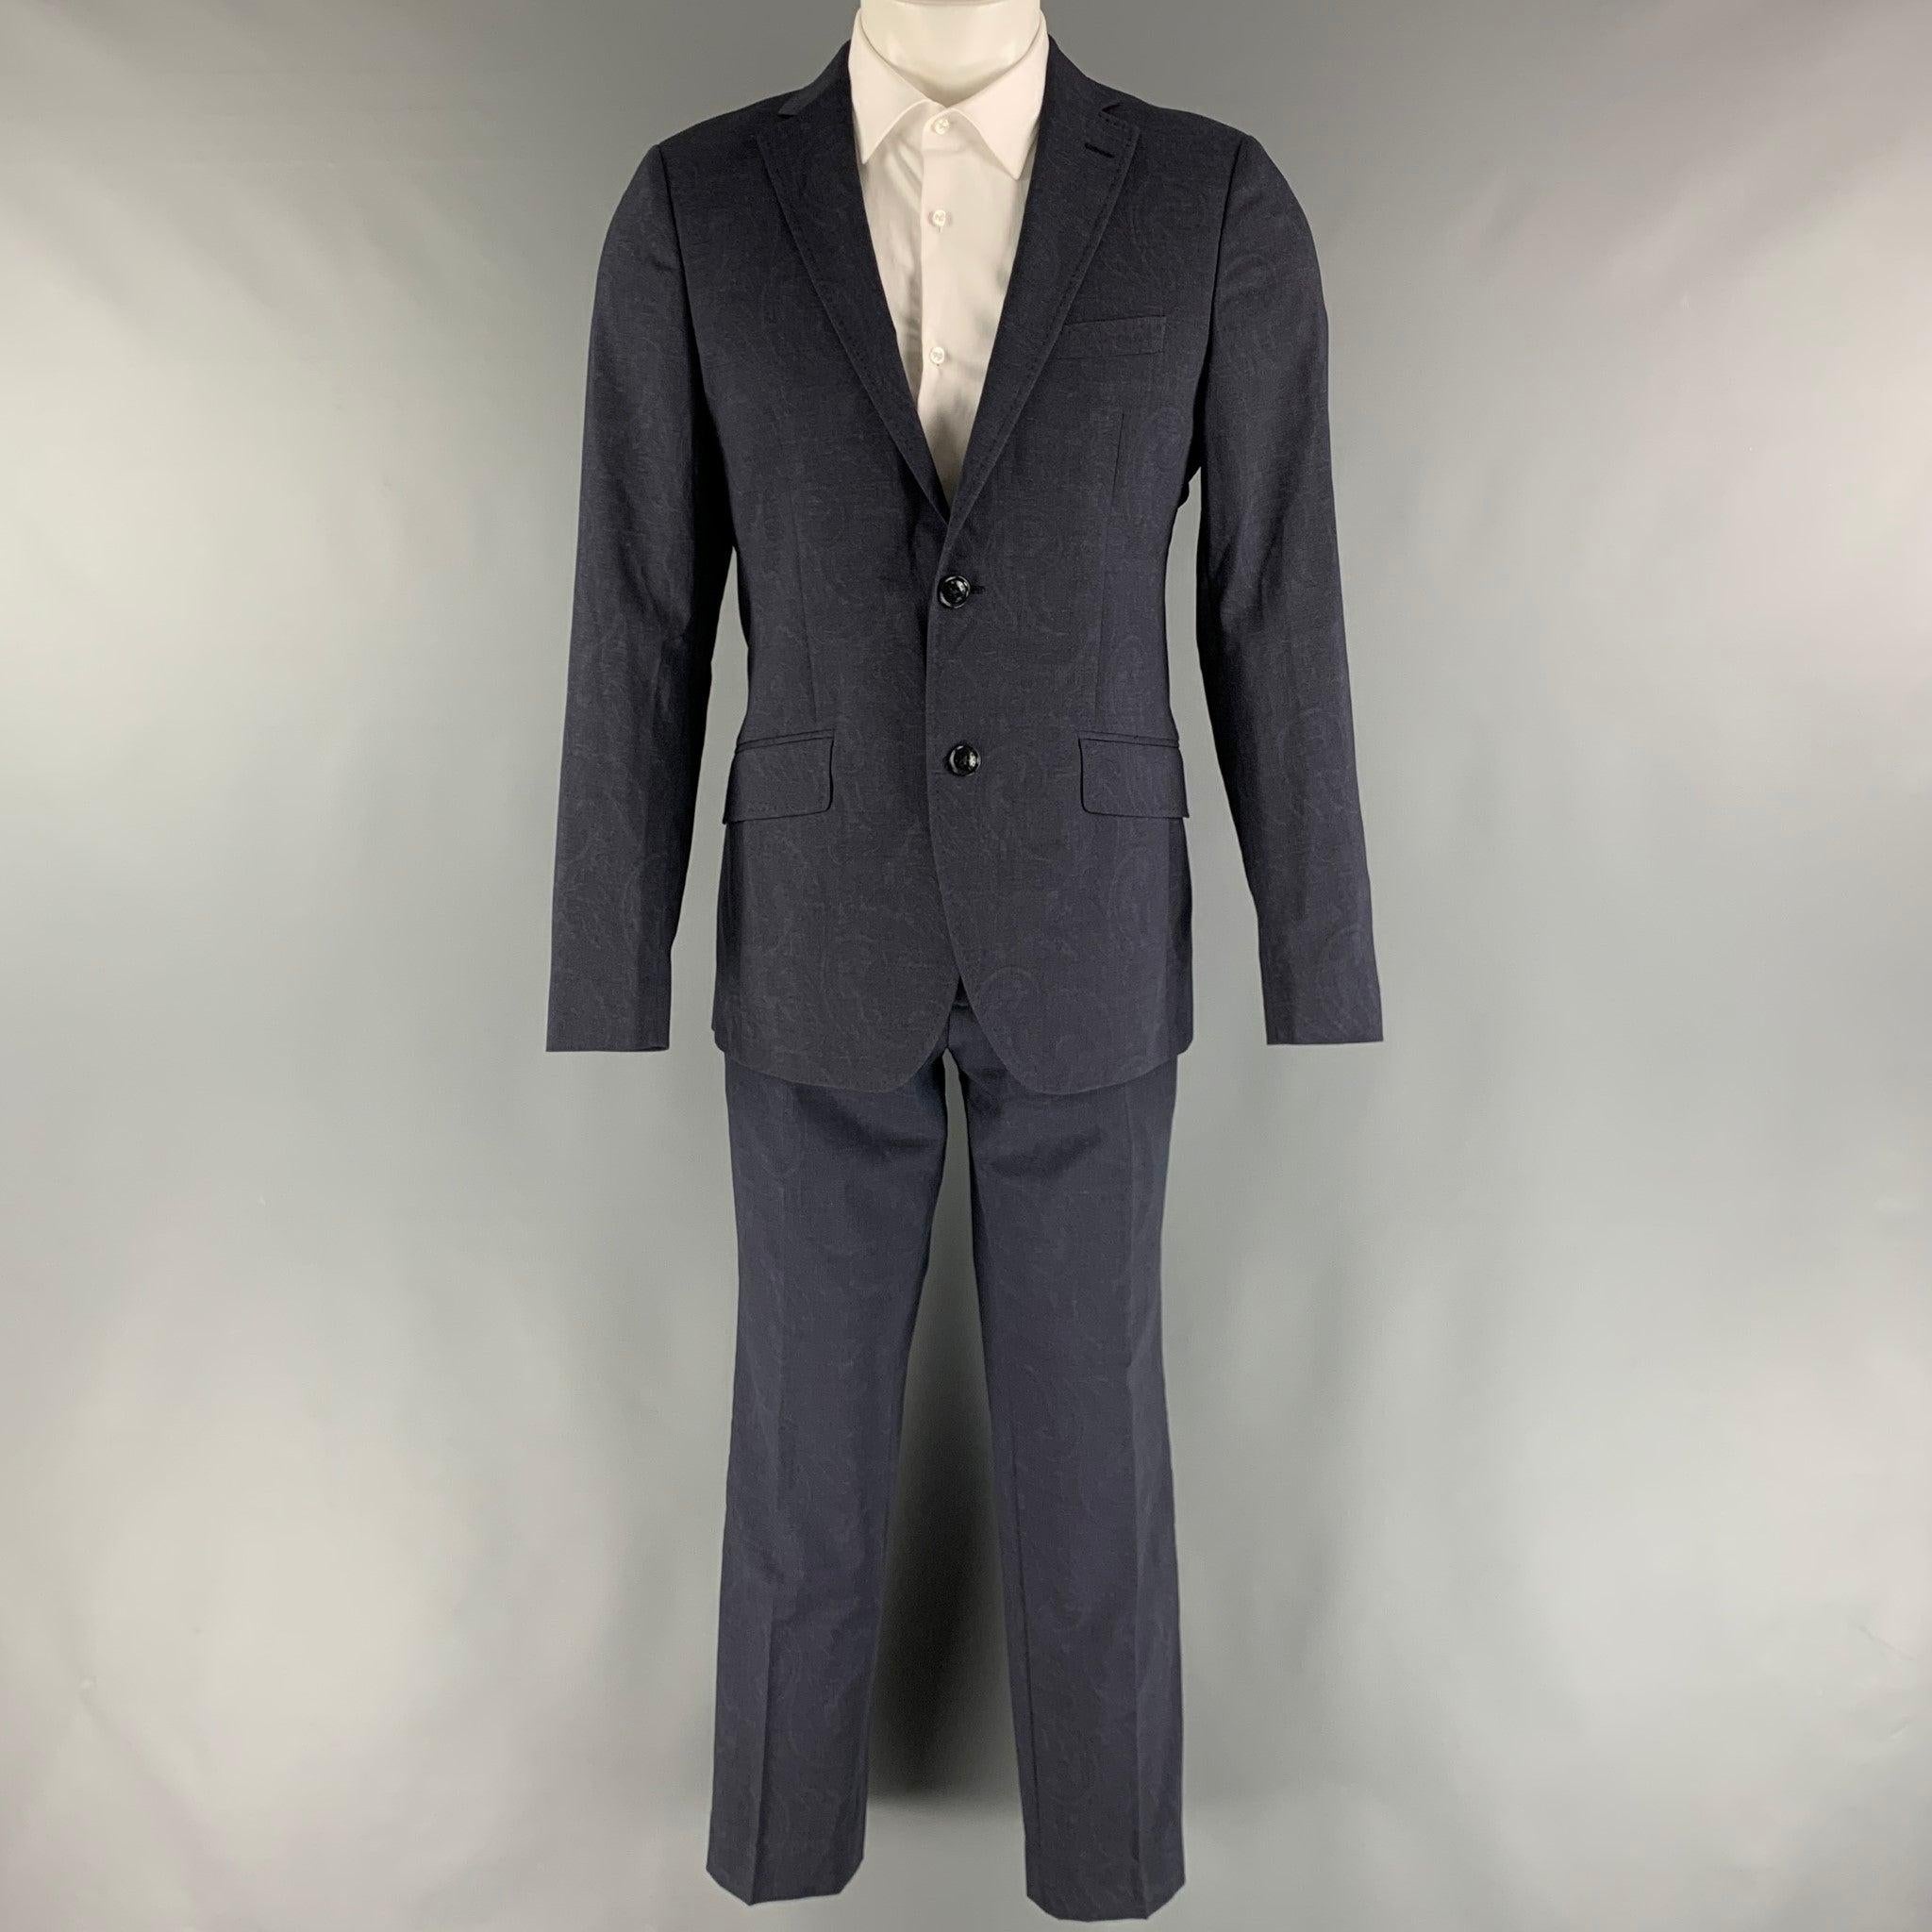 ETRO suit comes in a navy paisley wool and elastane material with a full liner and includes a single breasted, two button sport coat with notch lapel with top stitching and matching flat front trousers. Made in Italy.Excellent Pre-Owned Condition.